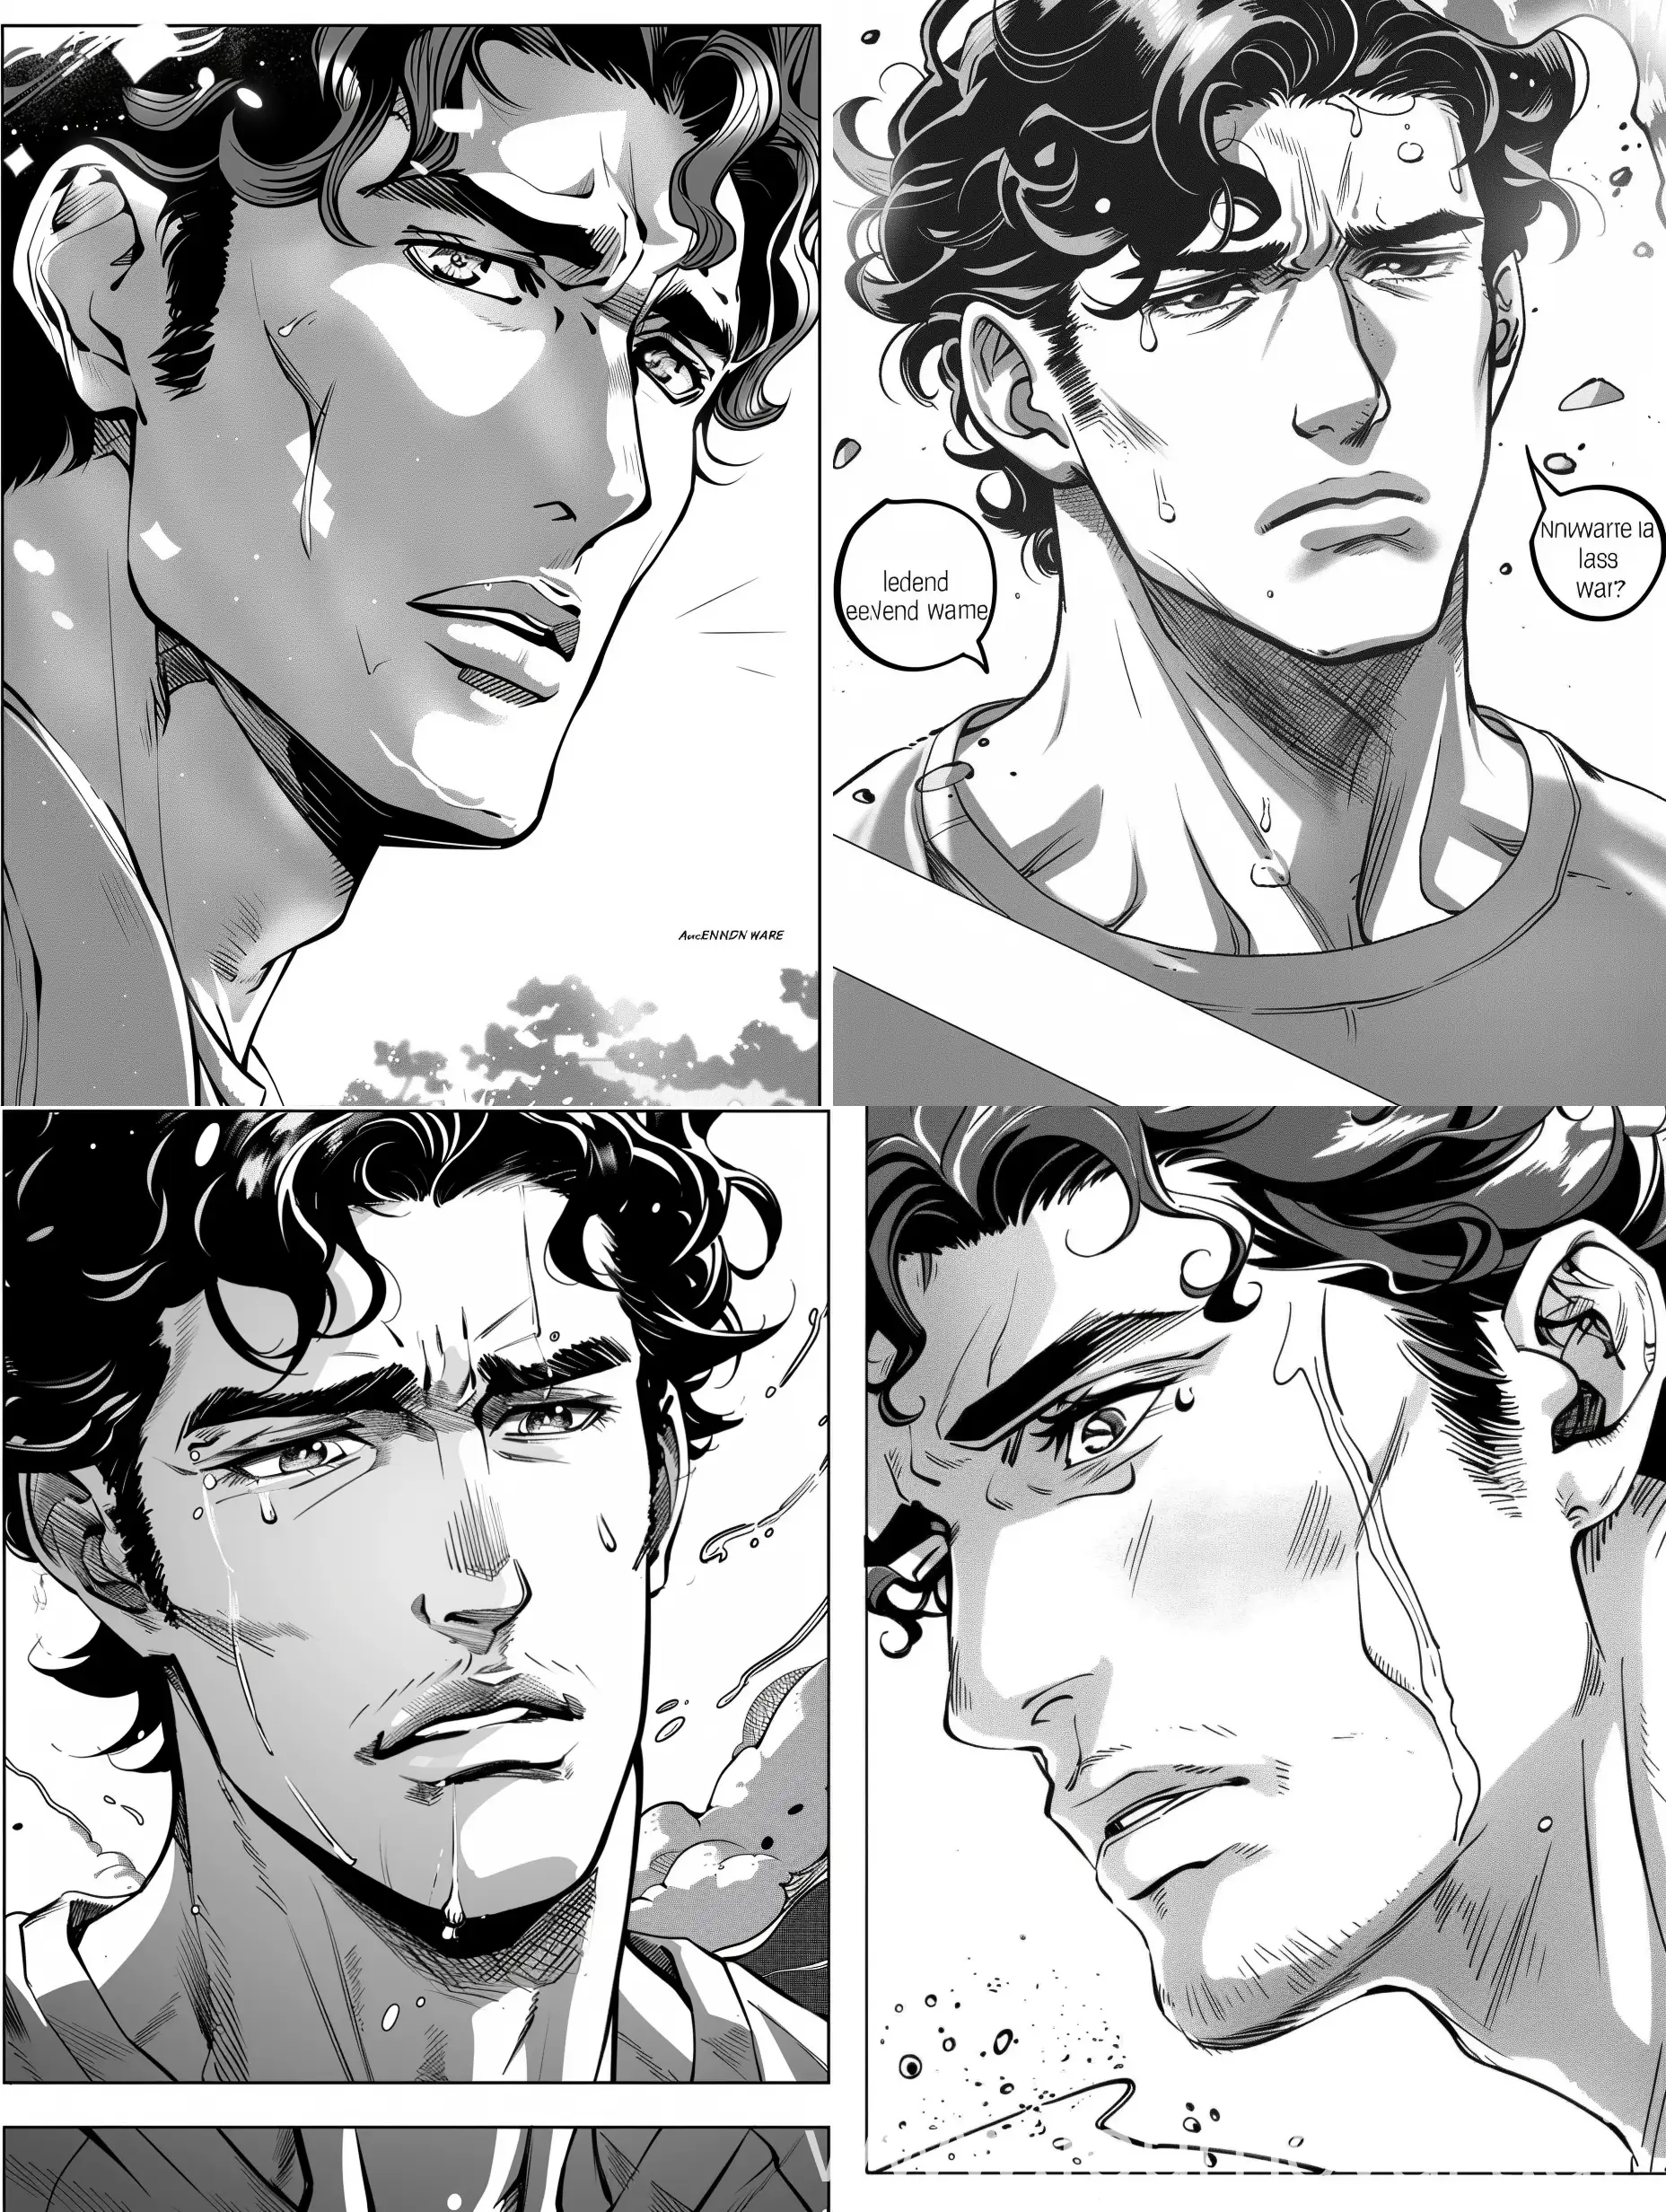 Manga style page,create 3 or pictures,black and white,then with small nose defined jawline,normal eyes and ears is now saying poor girl kid that he has ended the war.
--ar 2:3